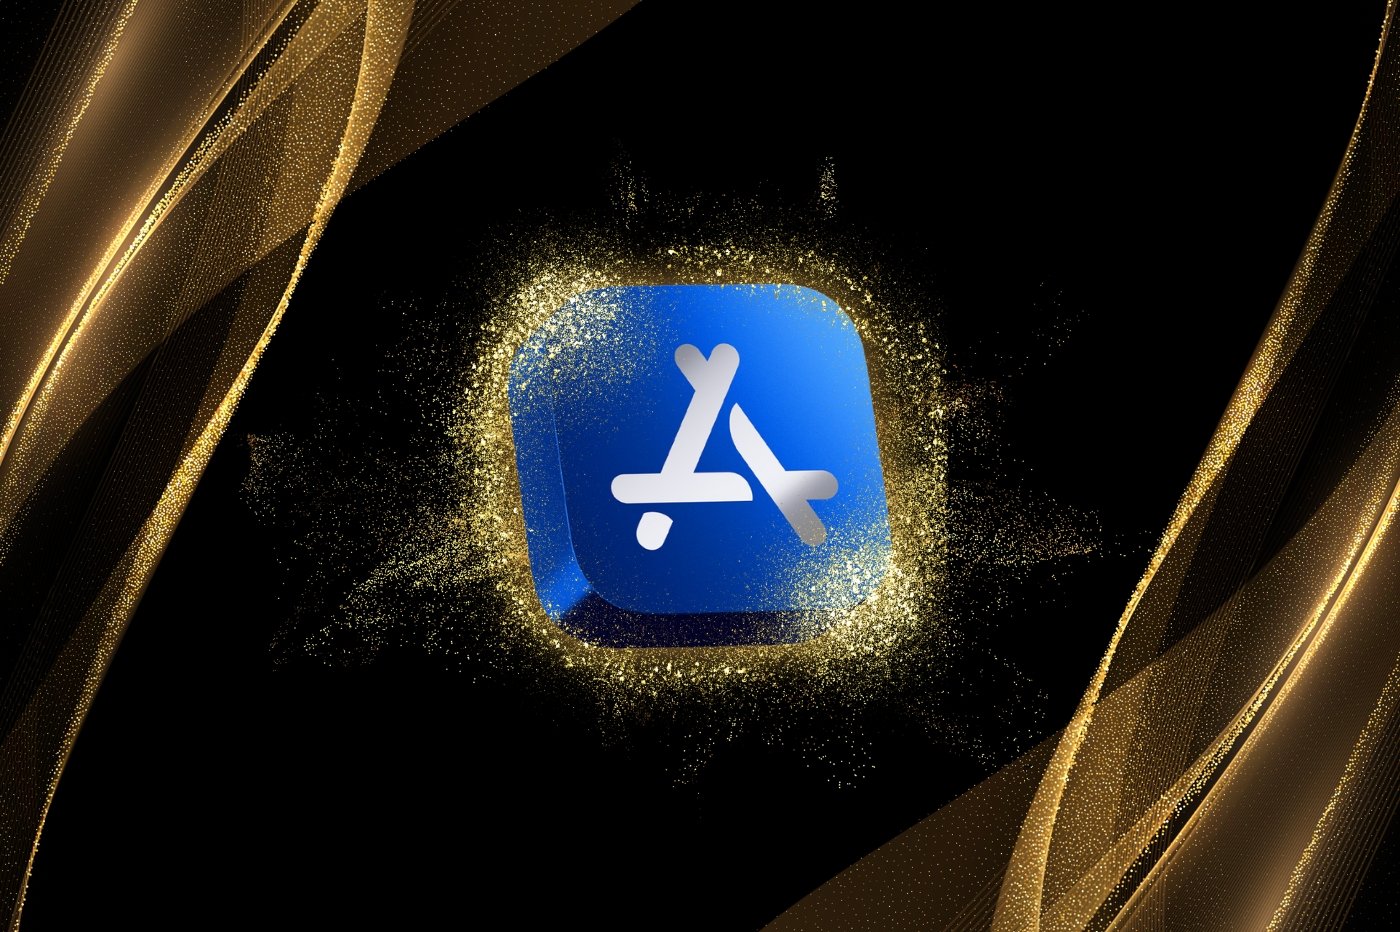 App store awards by iphon.fr